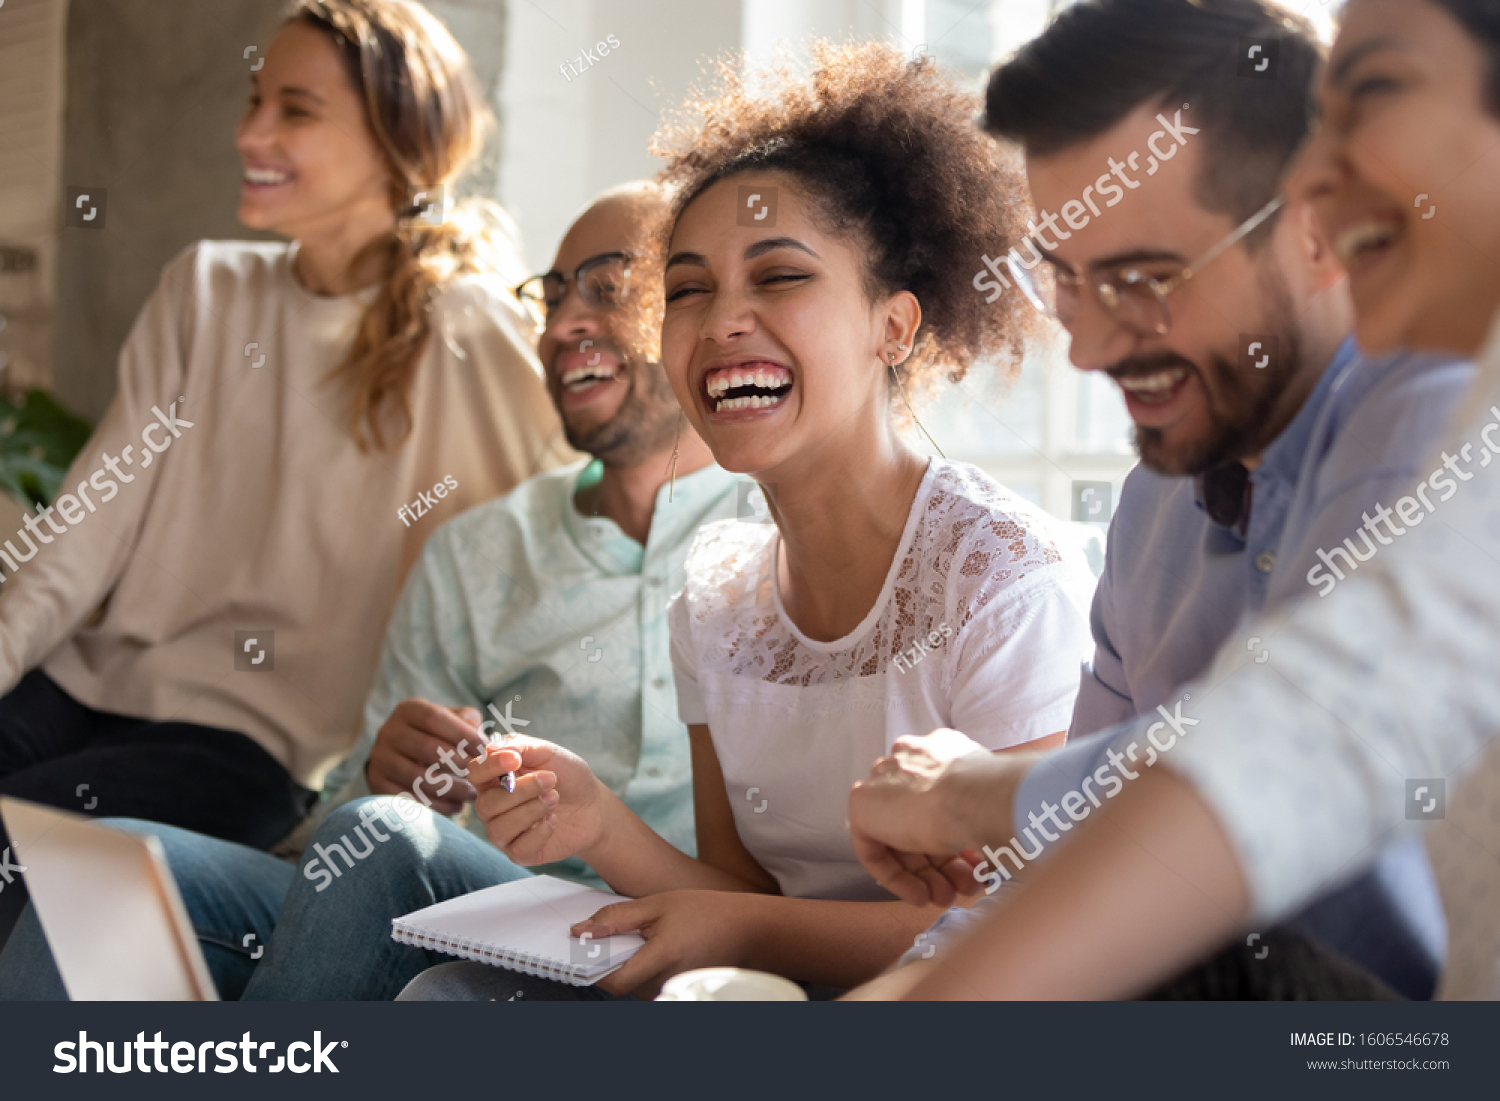 Overjoyed multiracial young people sit in row have fun laughing studying together indoors, happy international diverse students joke chat brainstorm preparing for test making notes learning #1606546678